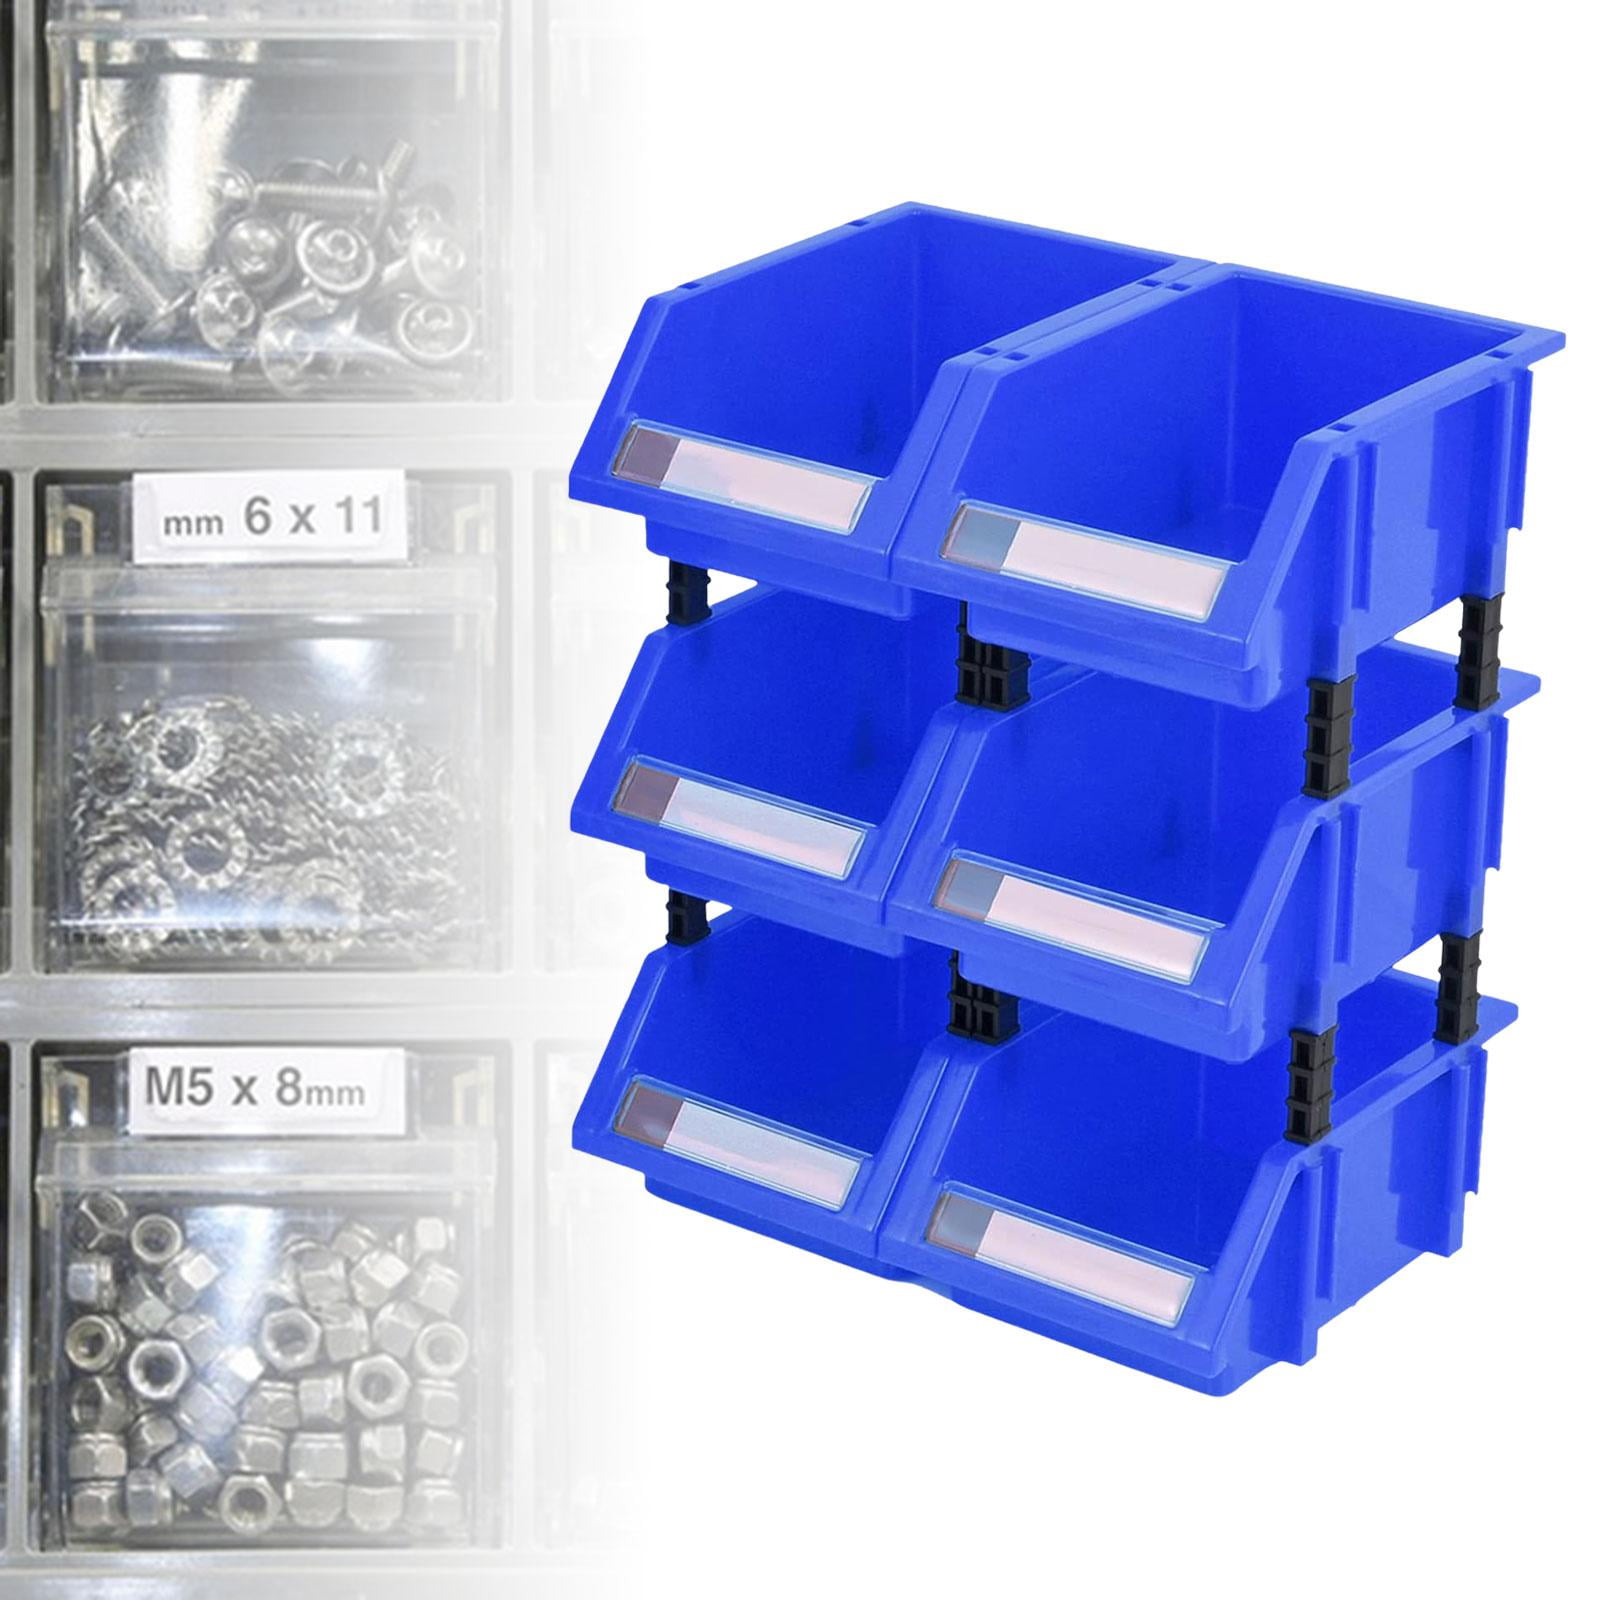 10Pcs Multi Purpose Garage Storage Bins Containers Hardware Parts Rack Open  Front Stacking for Cabinet Workshop Garage Shop Shed